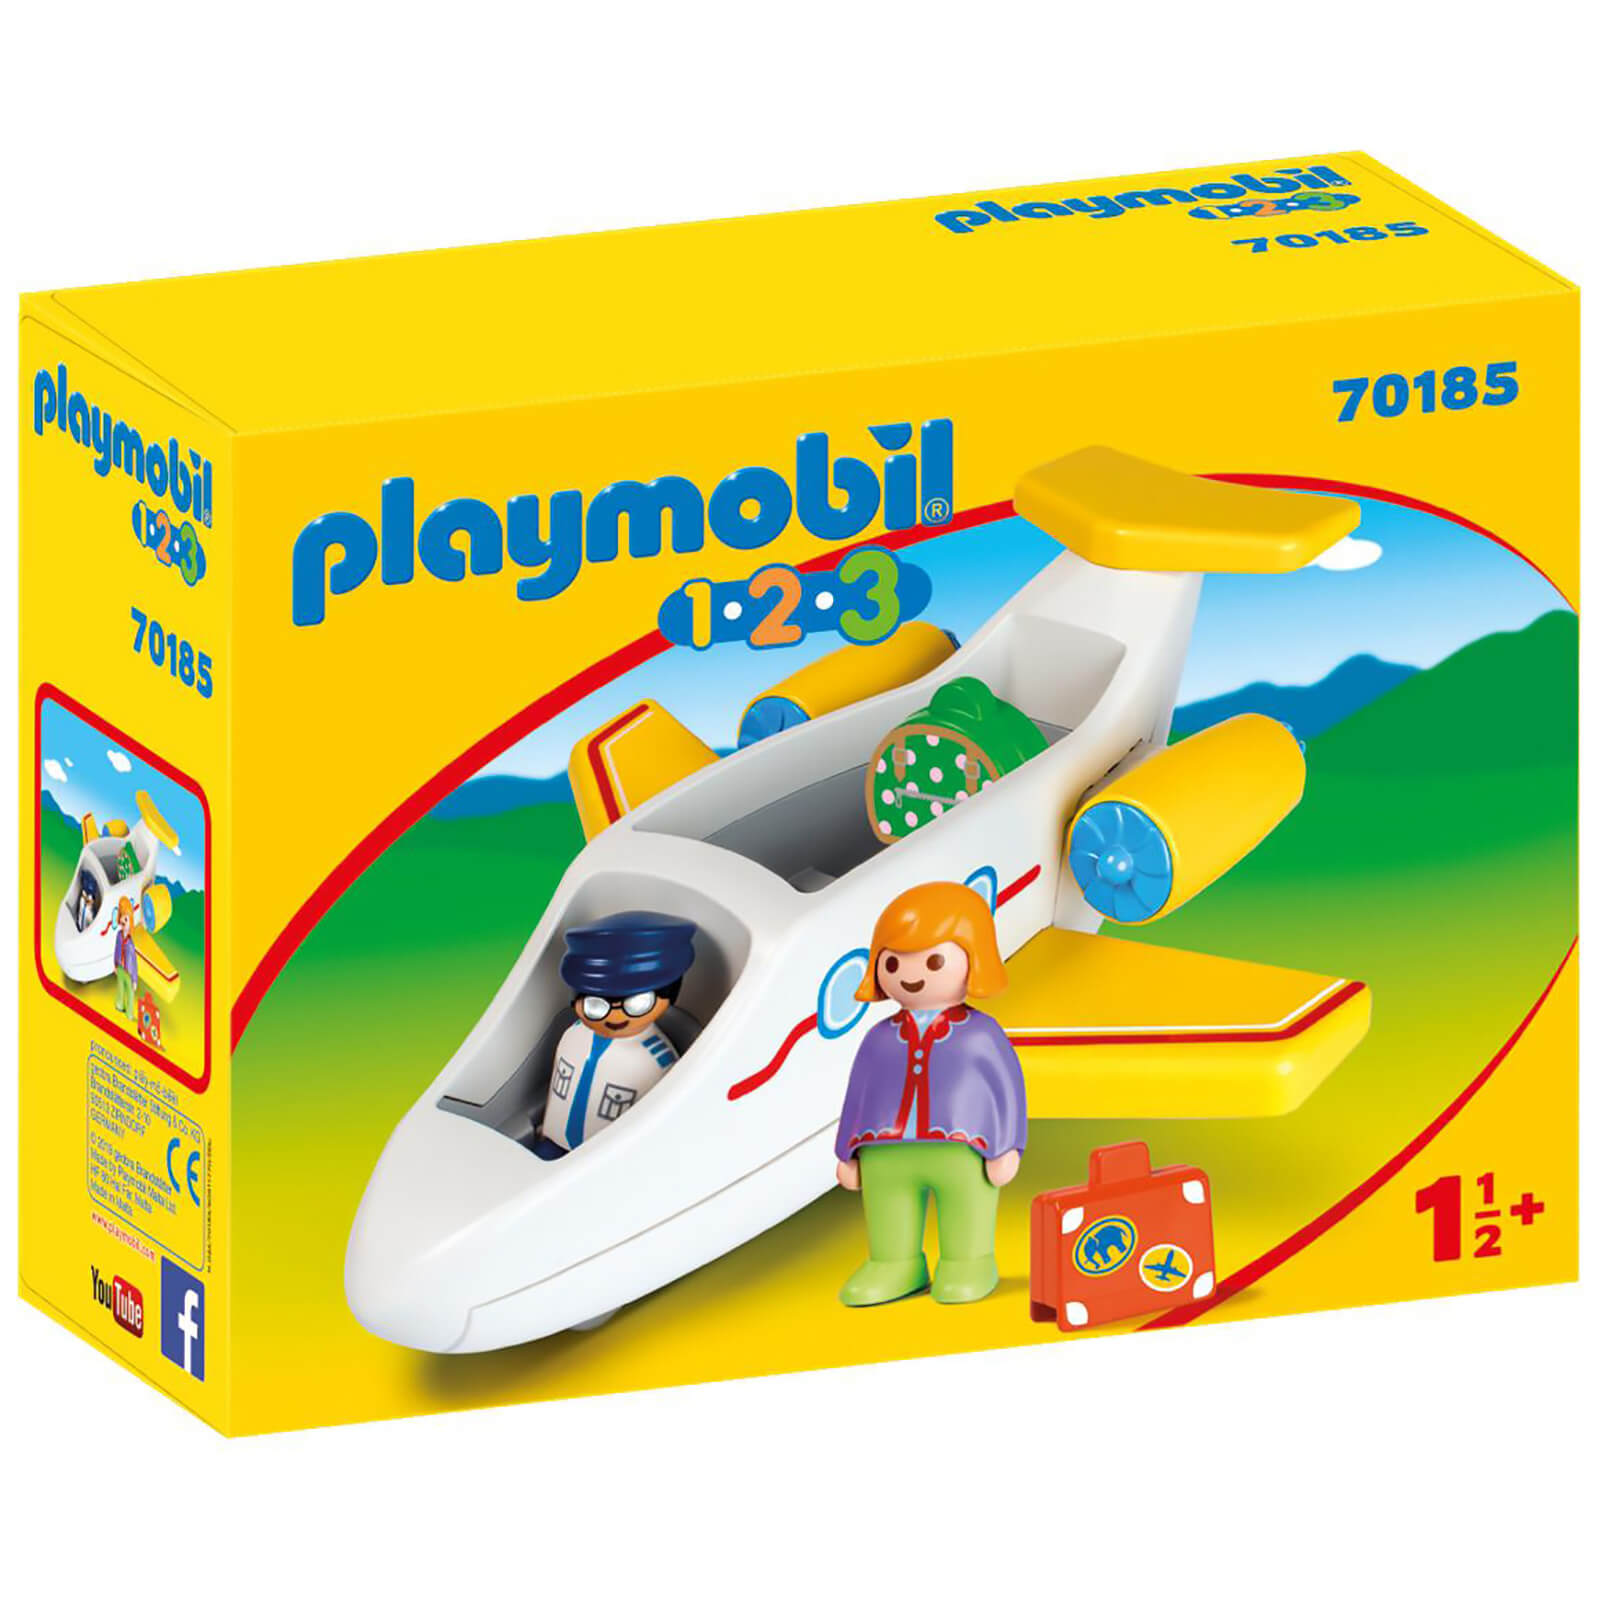 Playmobil 1.2.3 Plane with Passenger for Children 18 Months+ (70185)